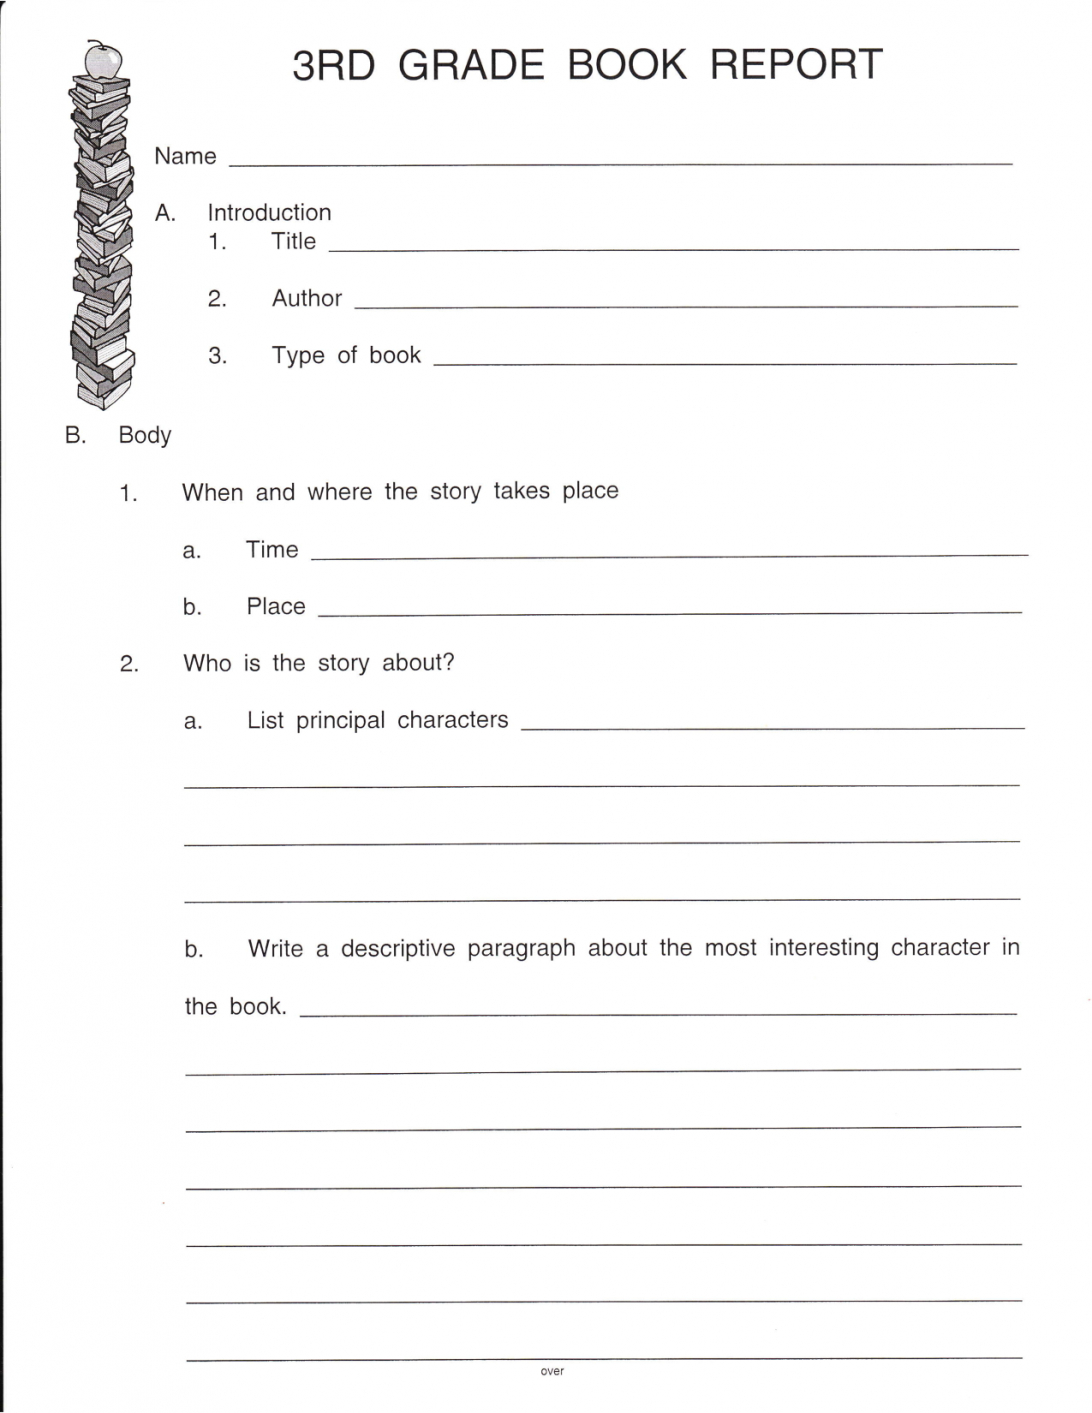 Book Report Examples 1St Grade College Level 5Th Pdf 2Nd 3Rd Throughout 2Nd Grade Book Report Template